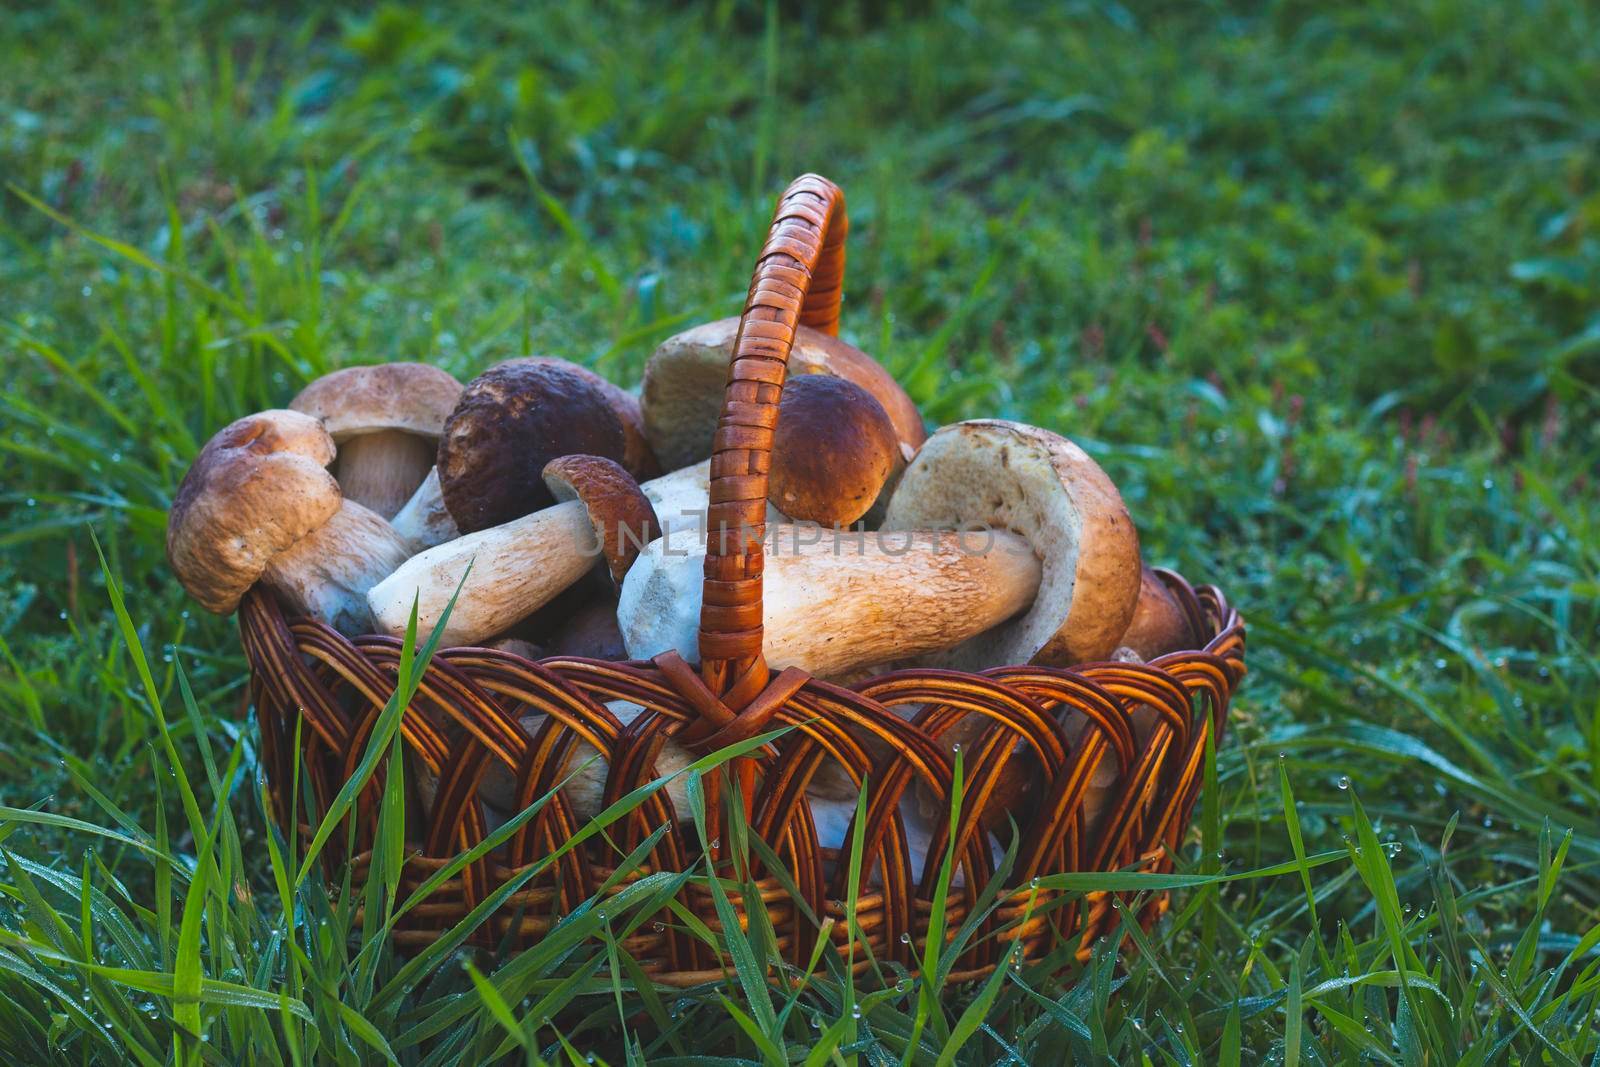 basket with cep mushrooms in grass by romvo